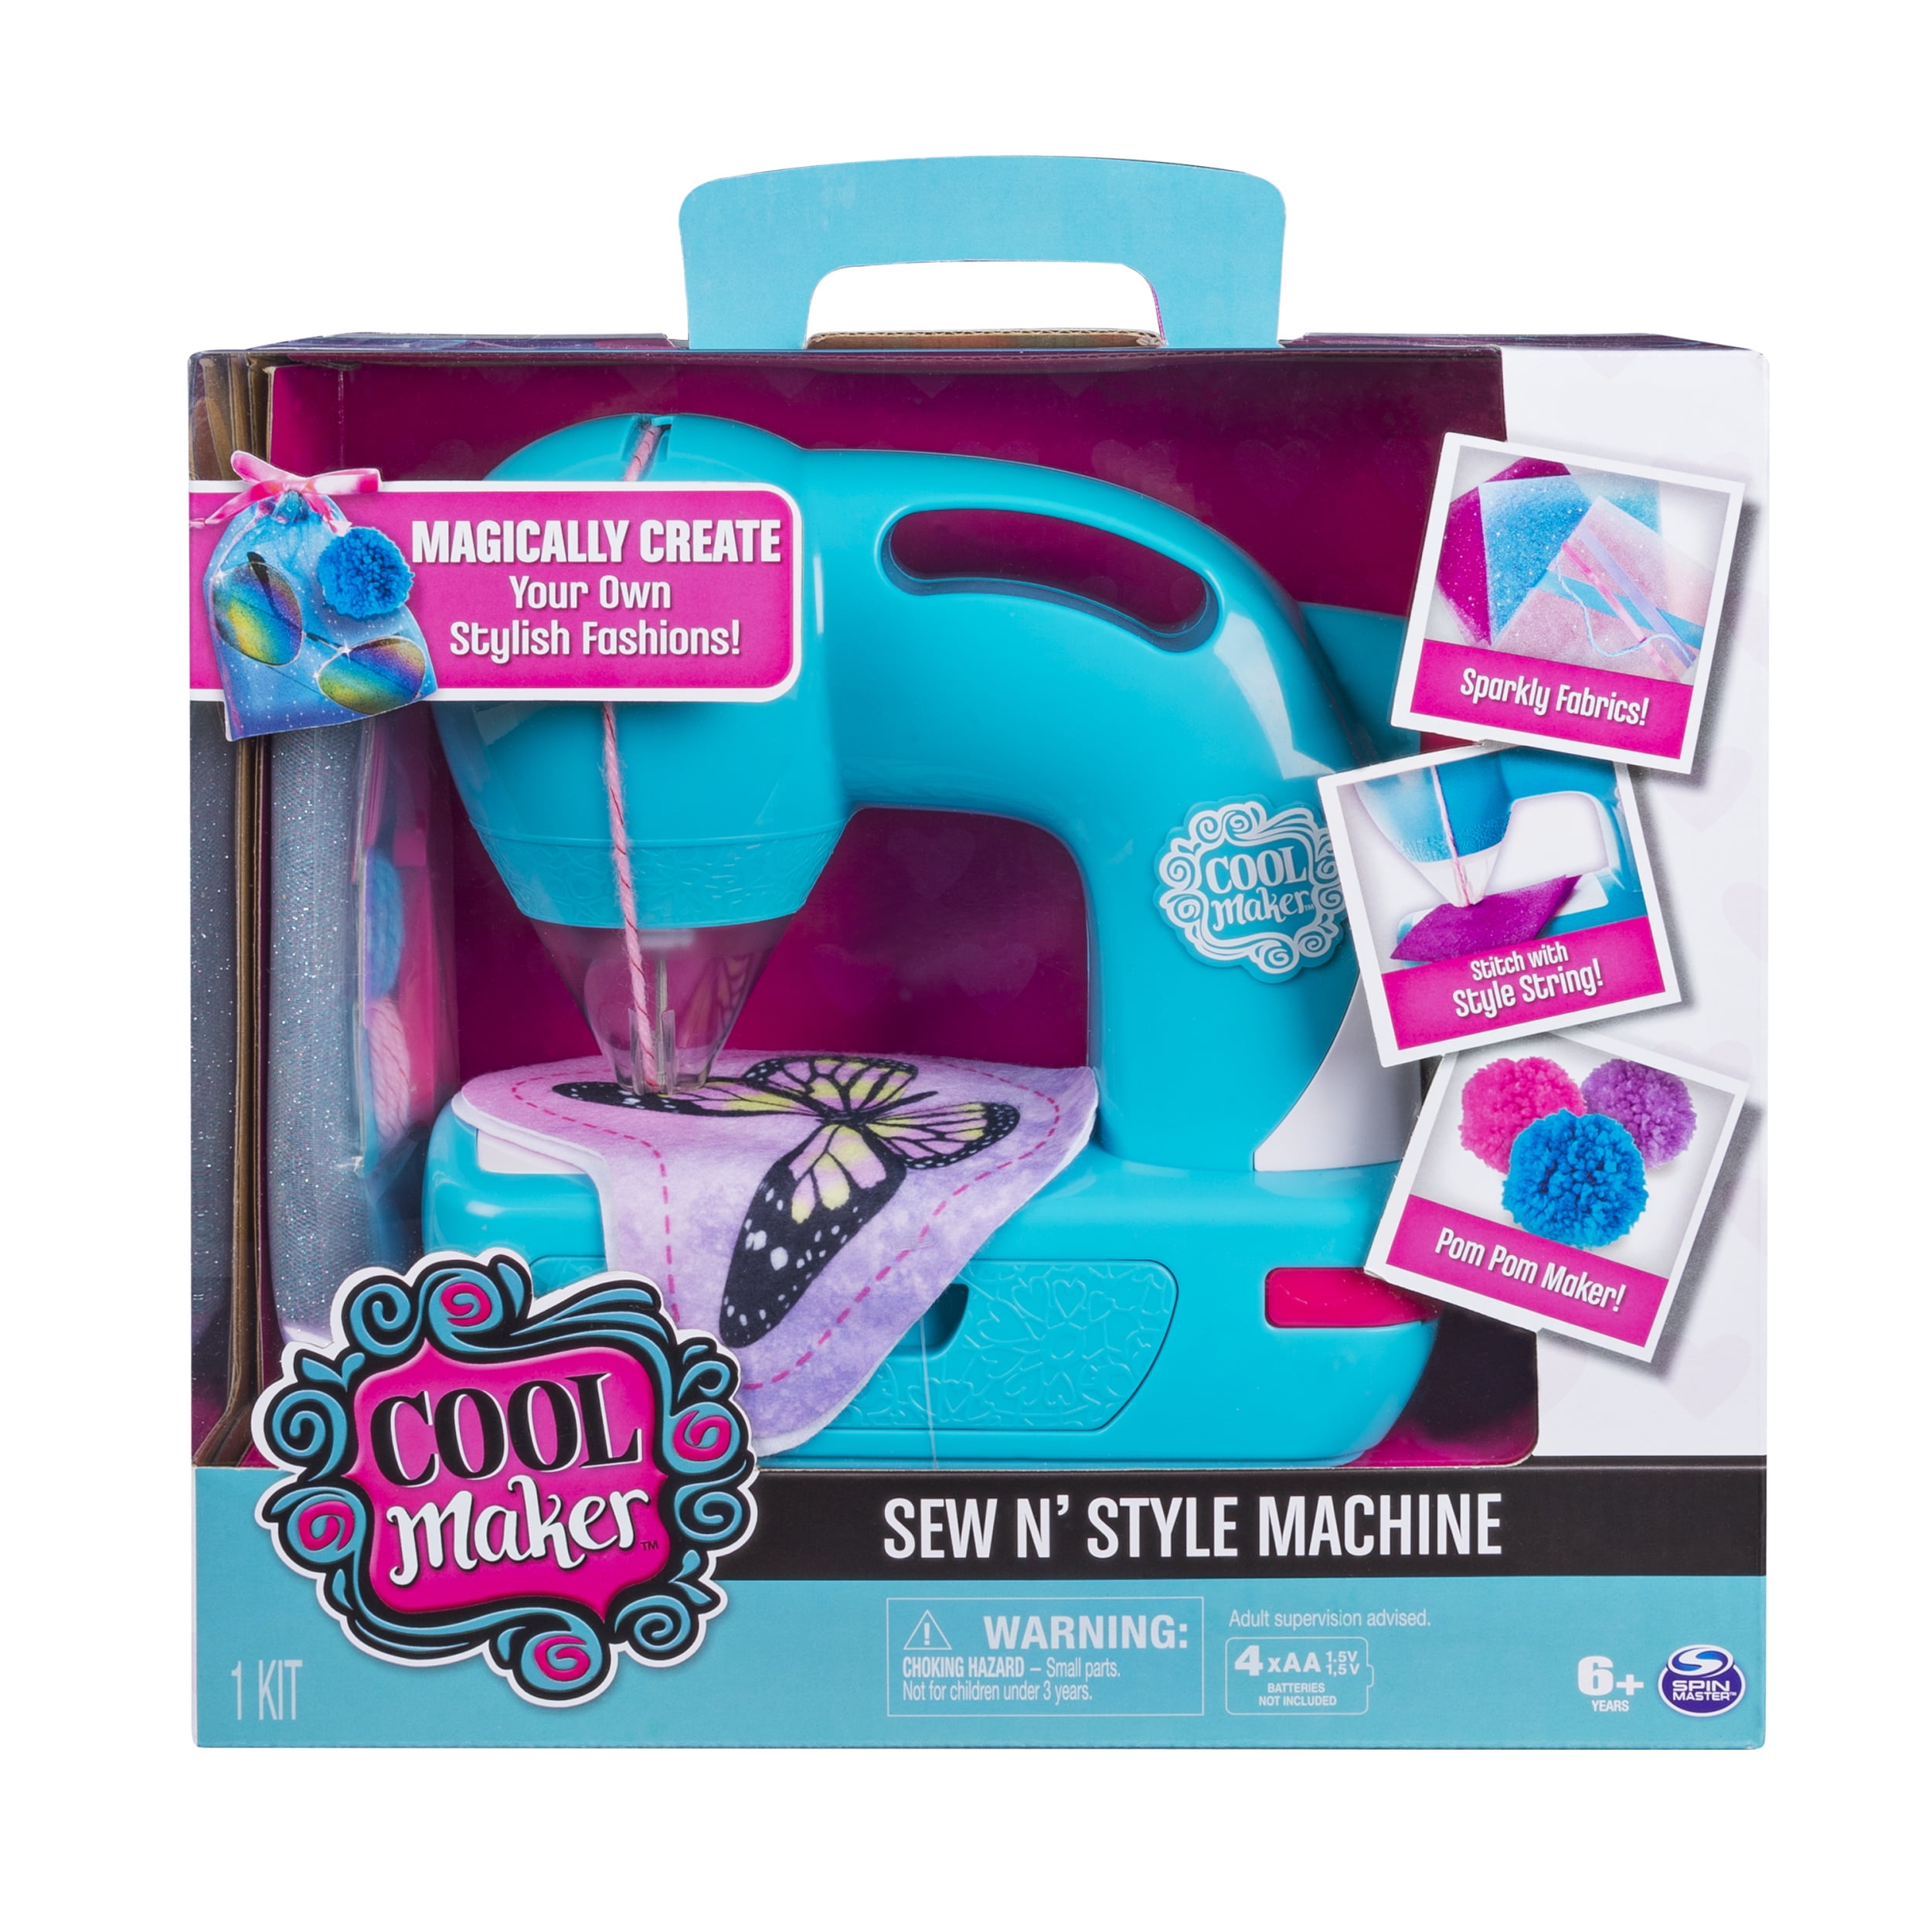 Cool Maker Sew Sewing Machine with Pom Pom Maker Attachment May Vary) -